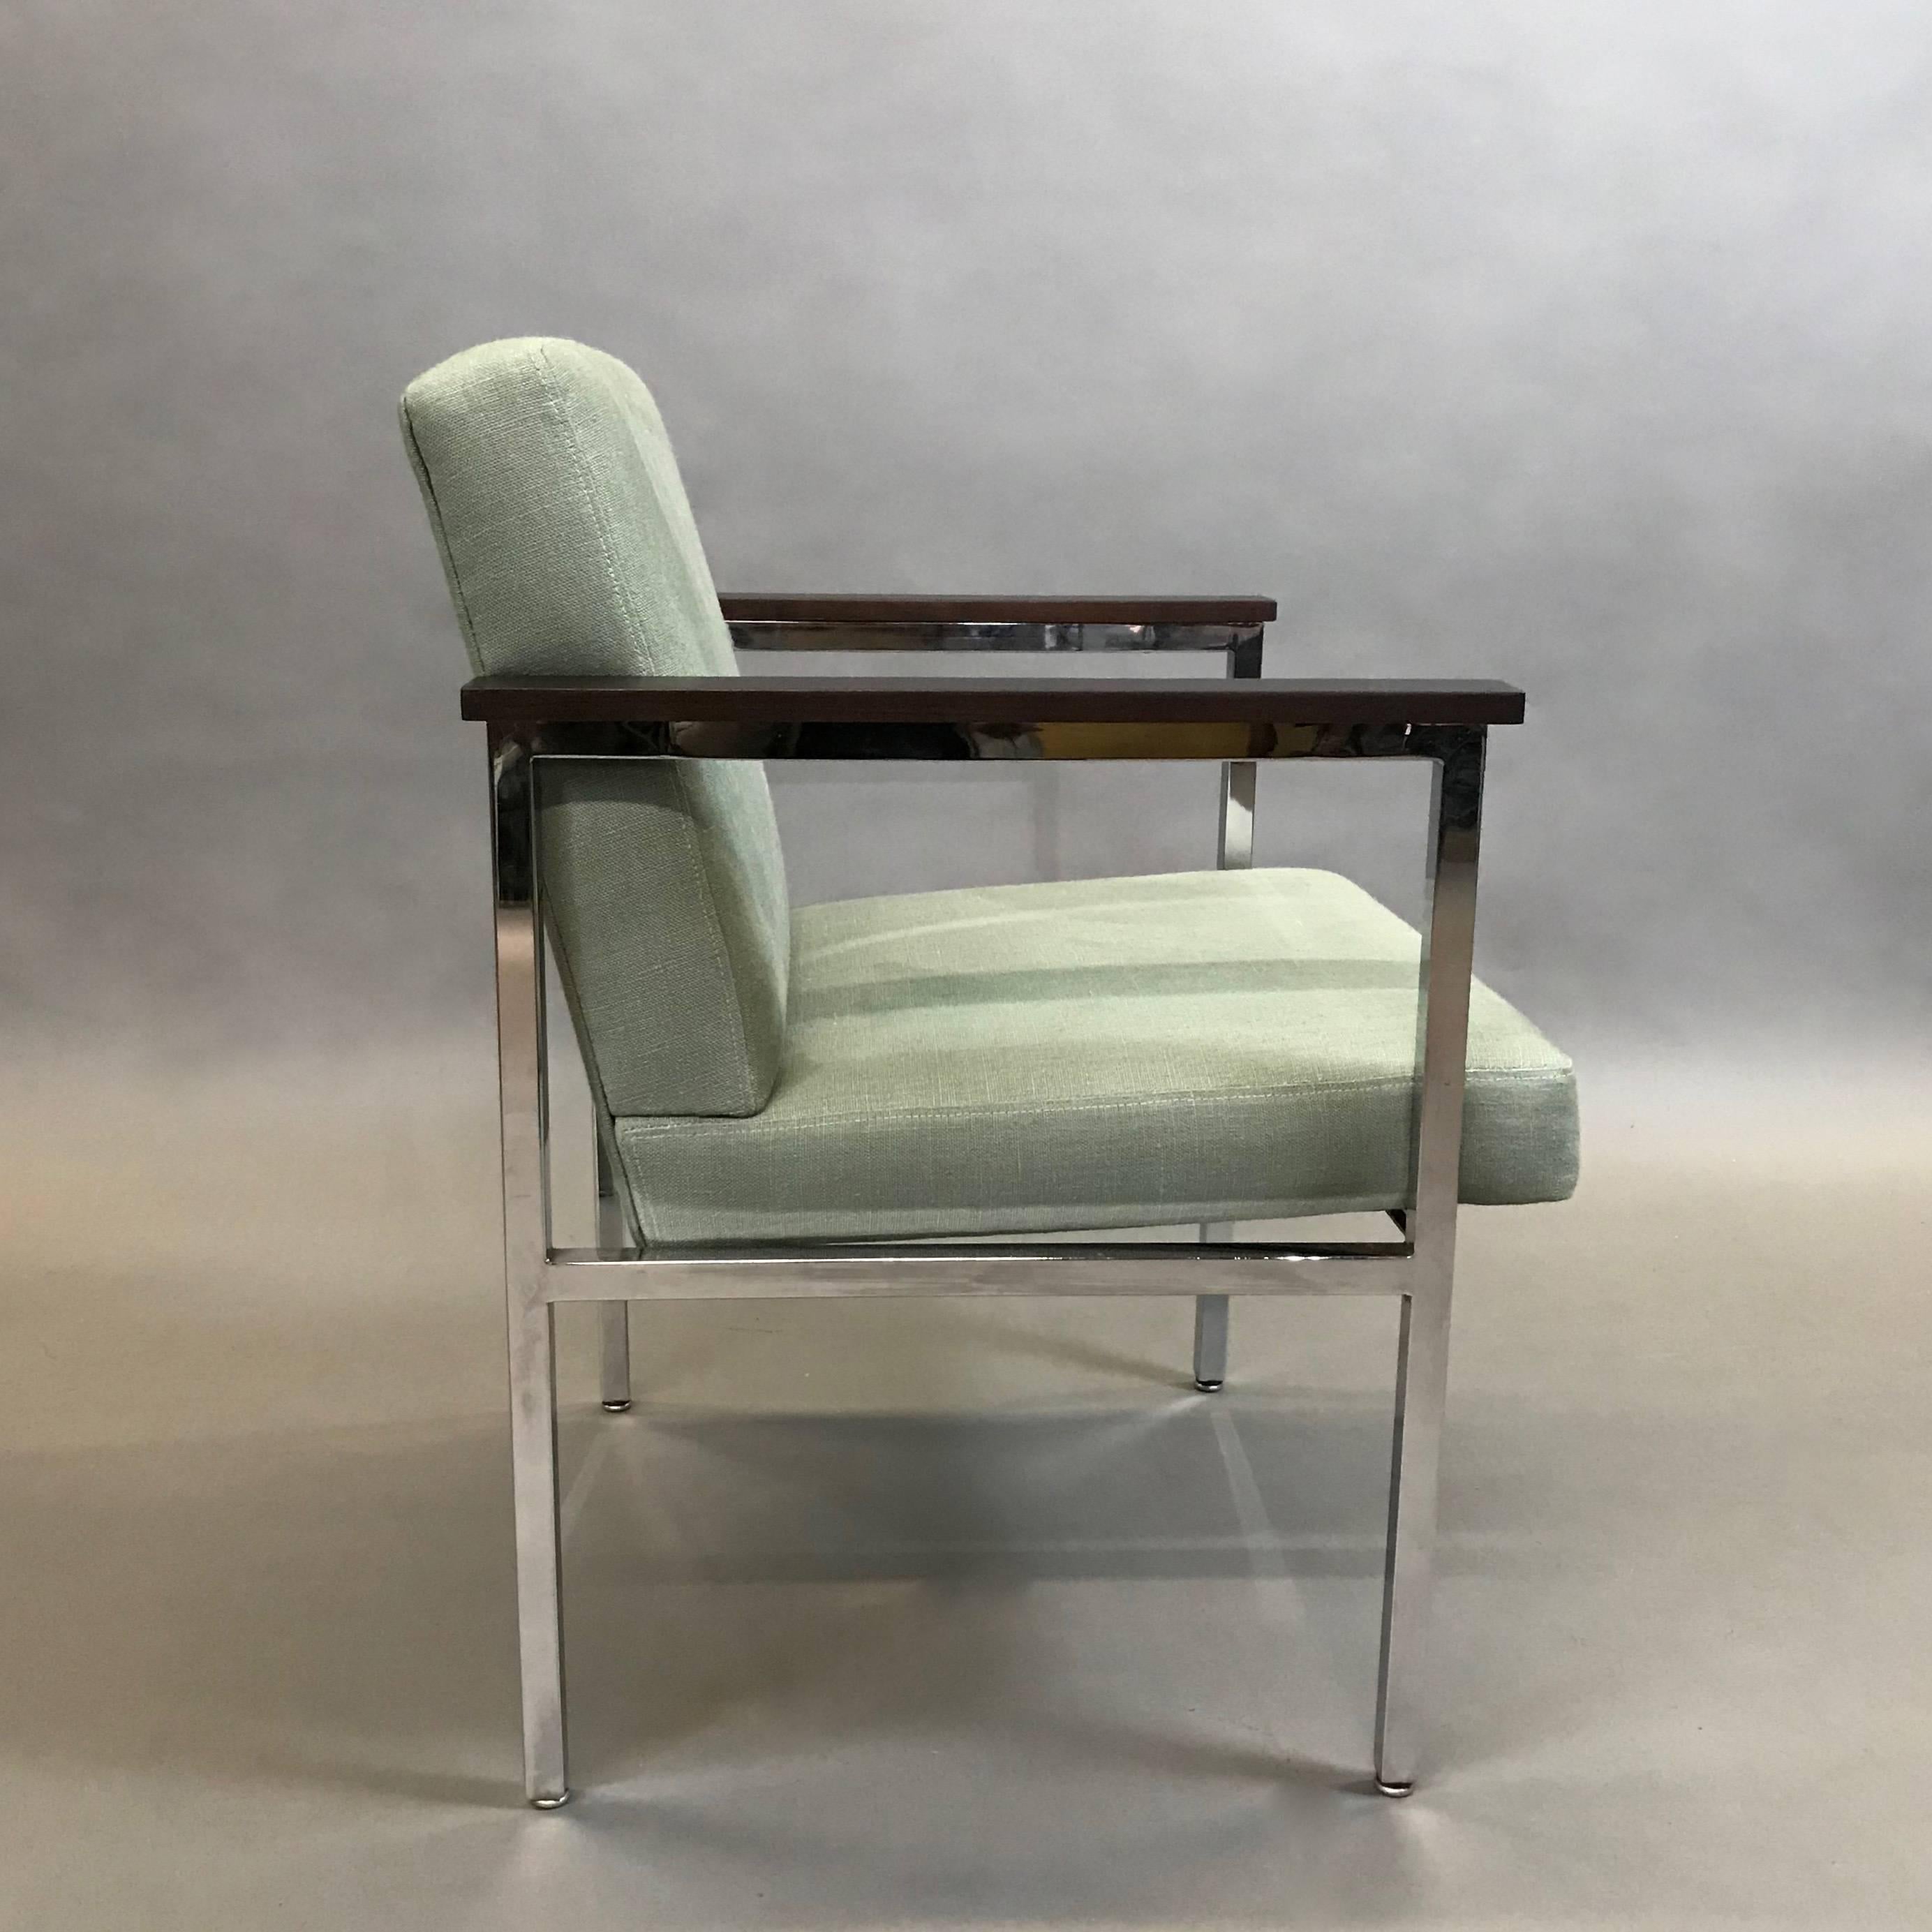 American Mid-Century Modern Upholstered Chrome Armchair For Sale